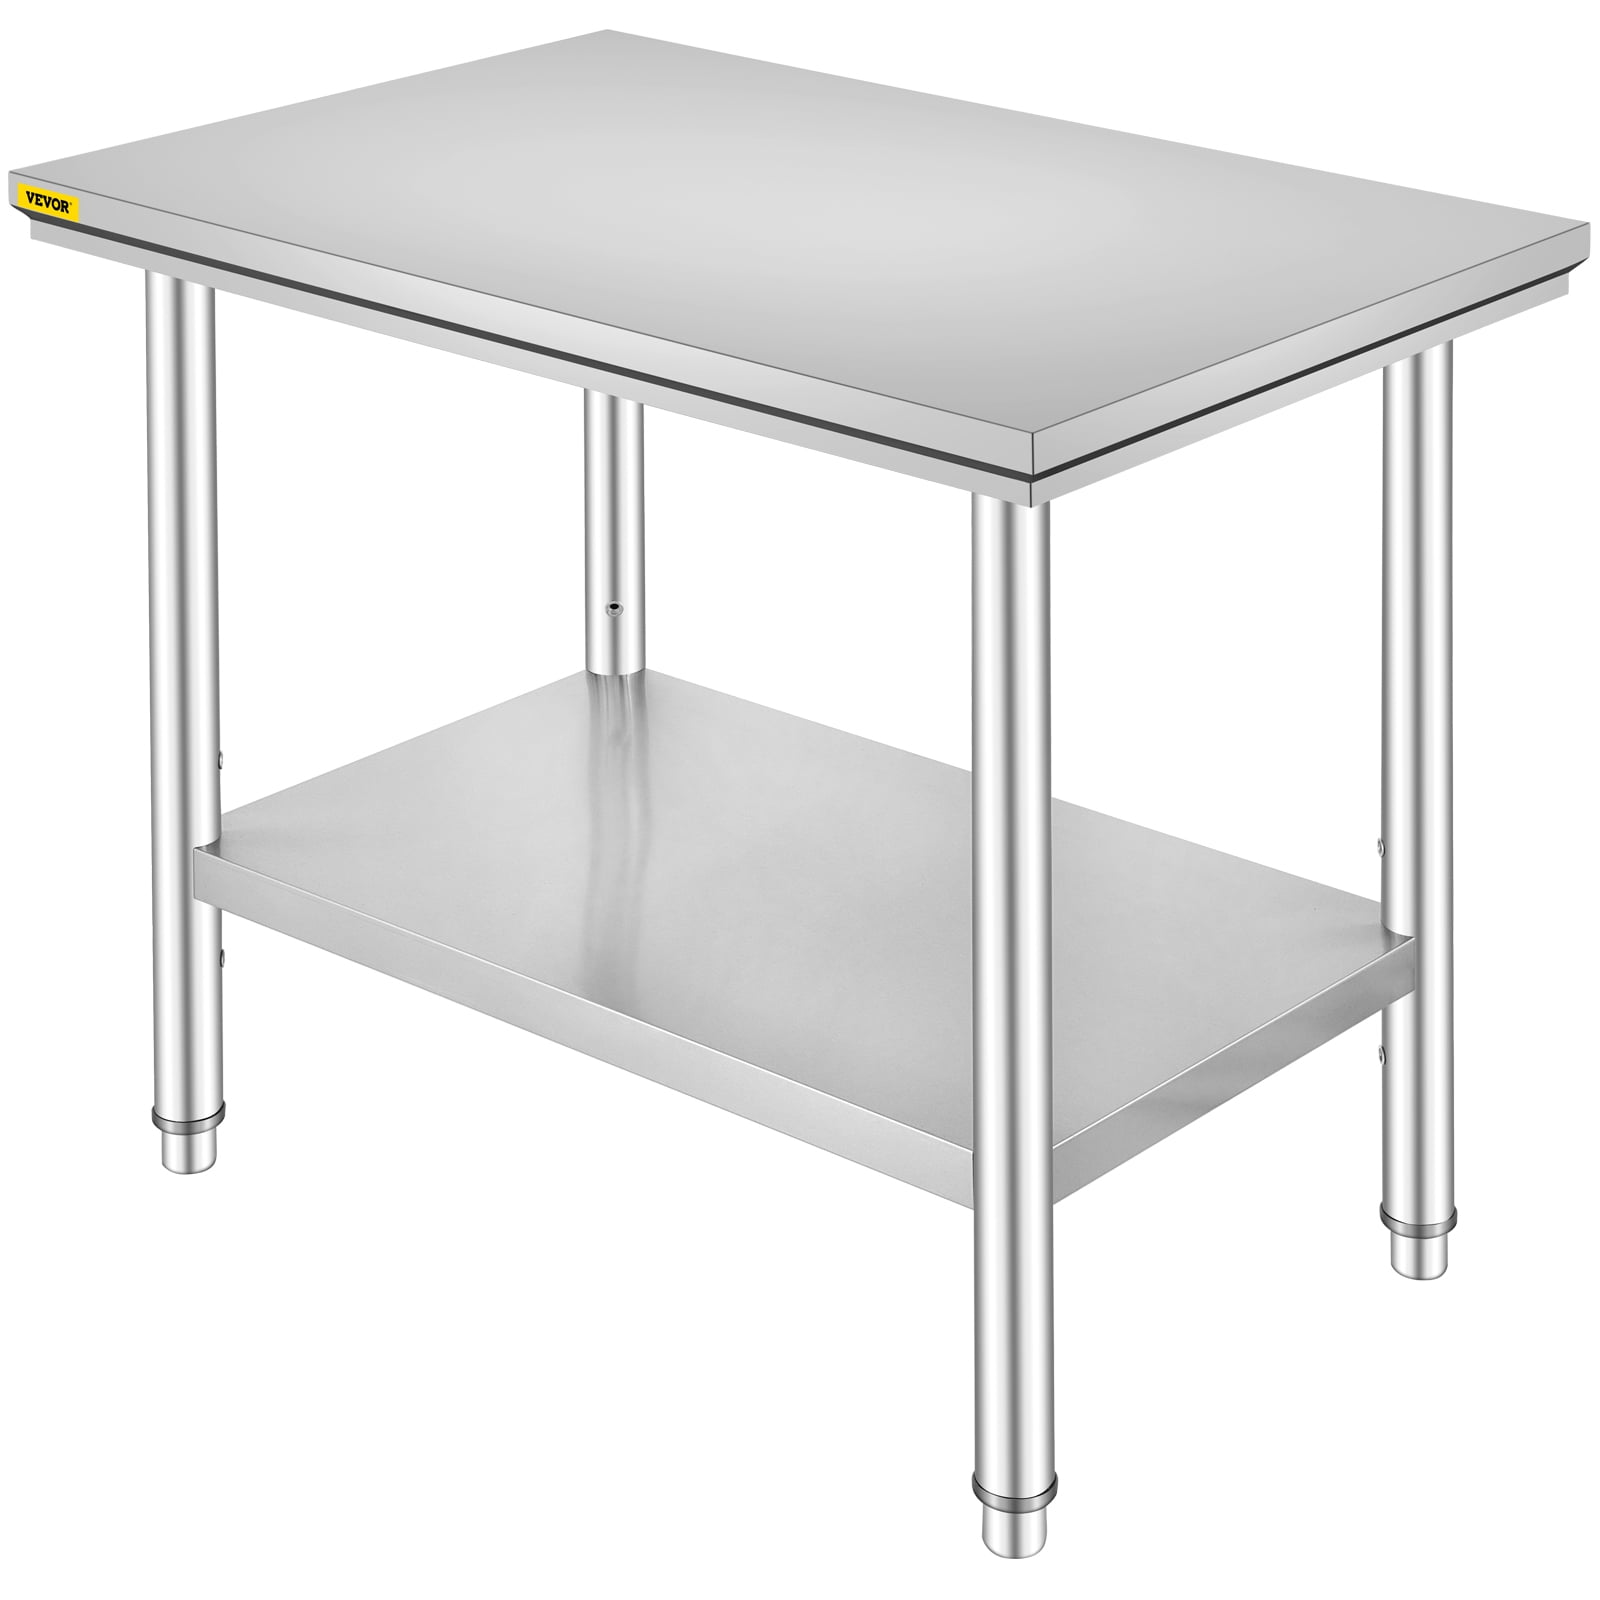 Home and Hotel Work Table with Adjustable Undershelf and Foot for Restaurant Stainless Steel Table NSF Commercial Heavy Duty Workbench 